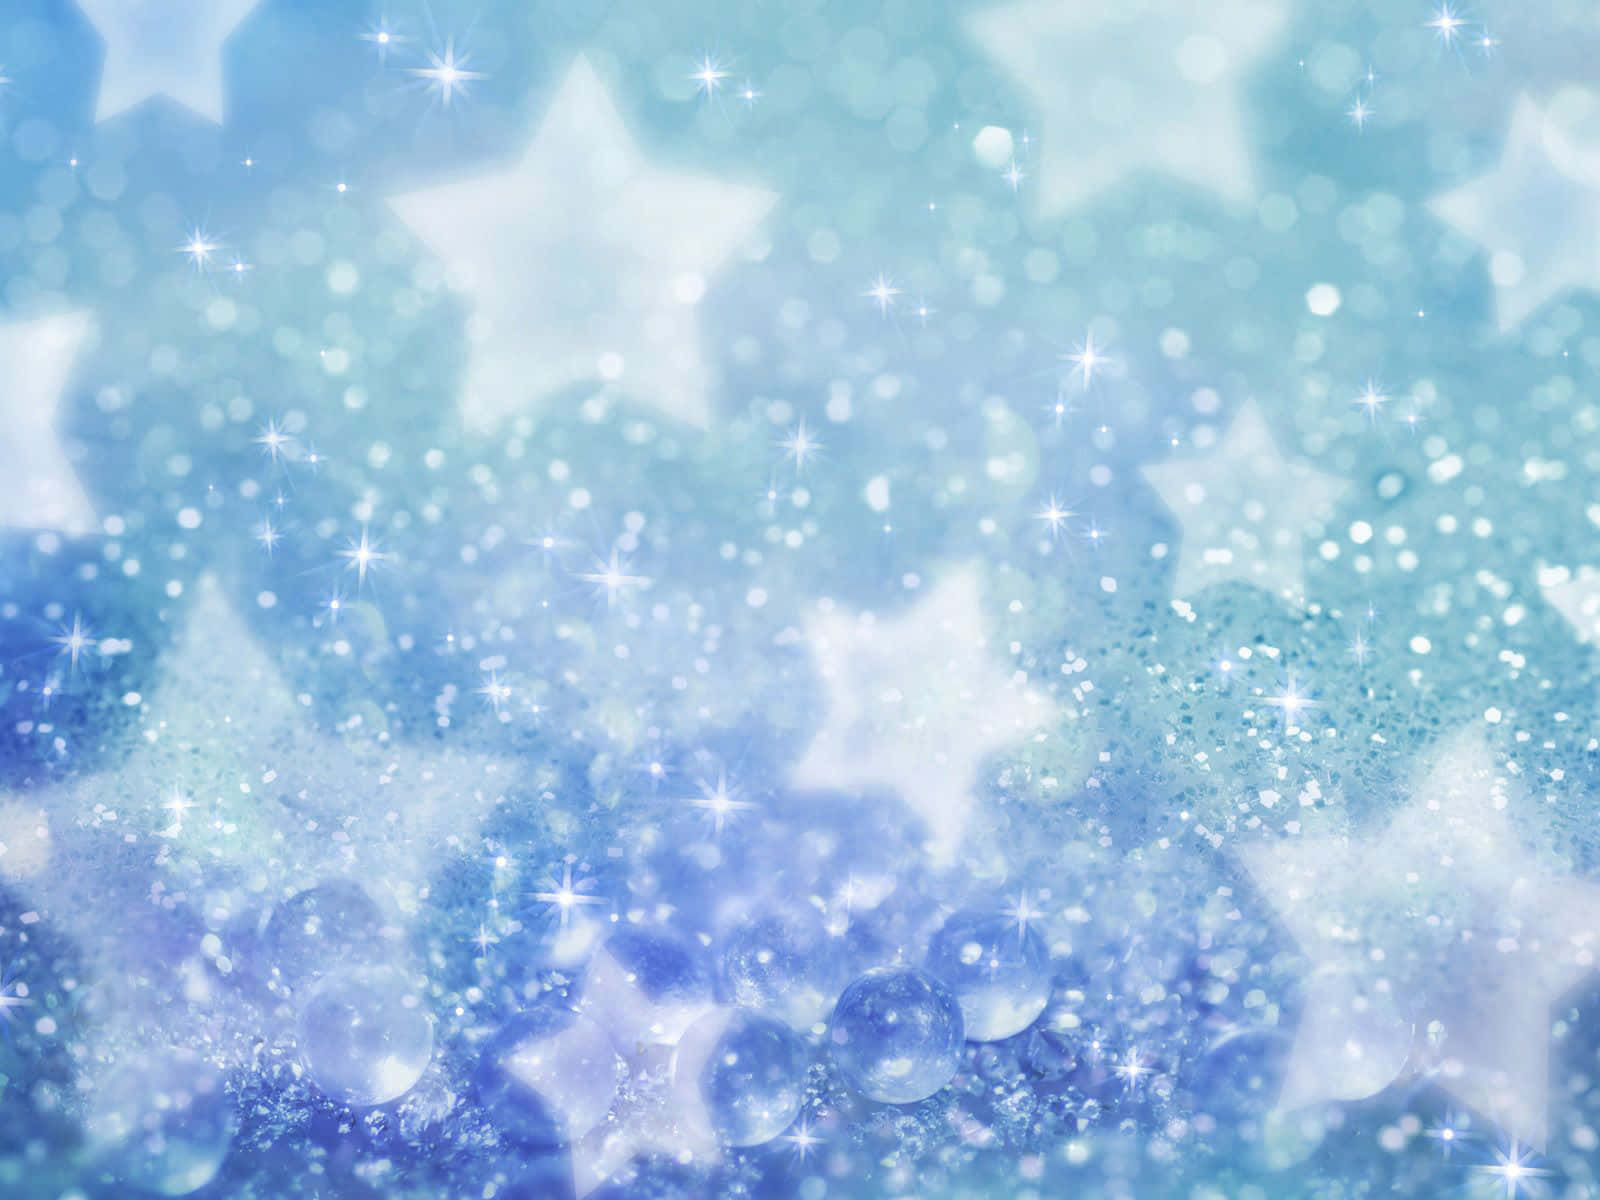 a blue and white background with stars and sparkles